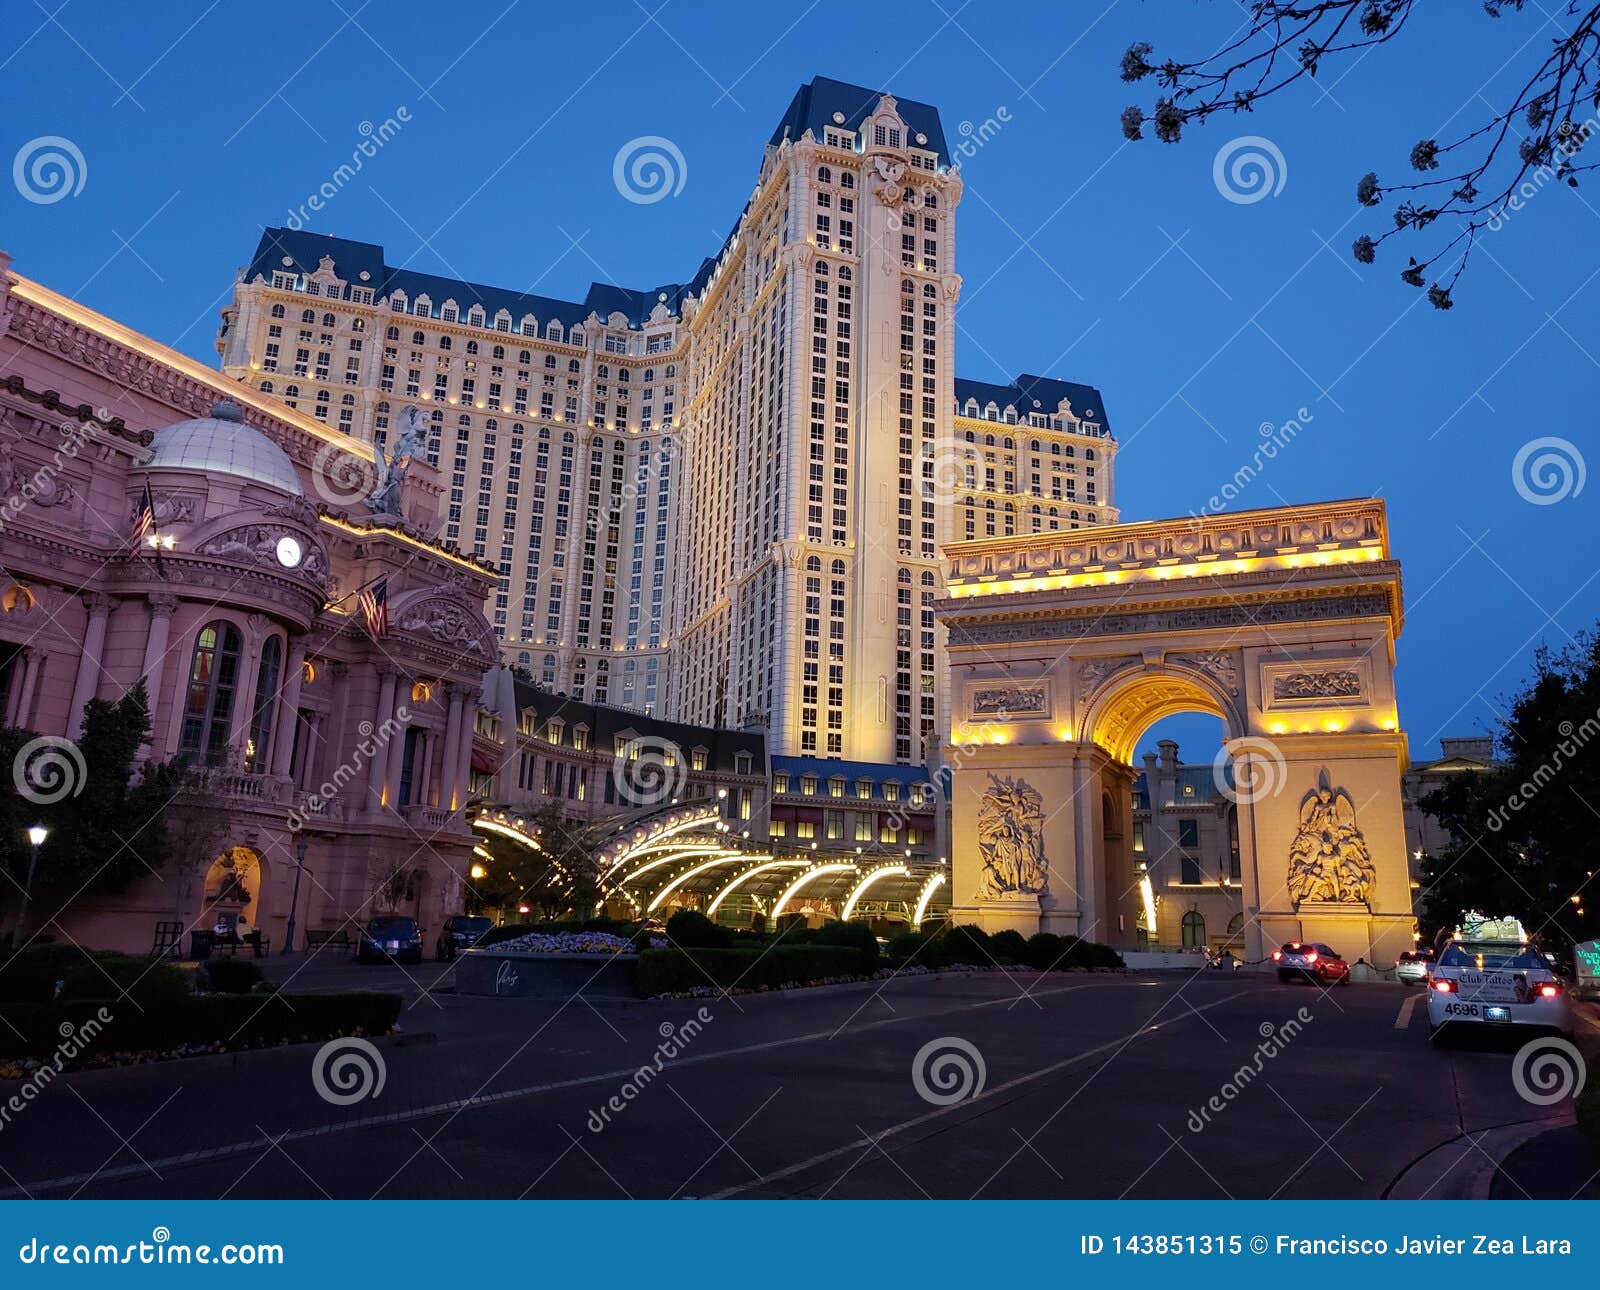 Exterior View of the Paris Hotel in the City of Las Vegas, Nevada